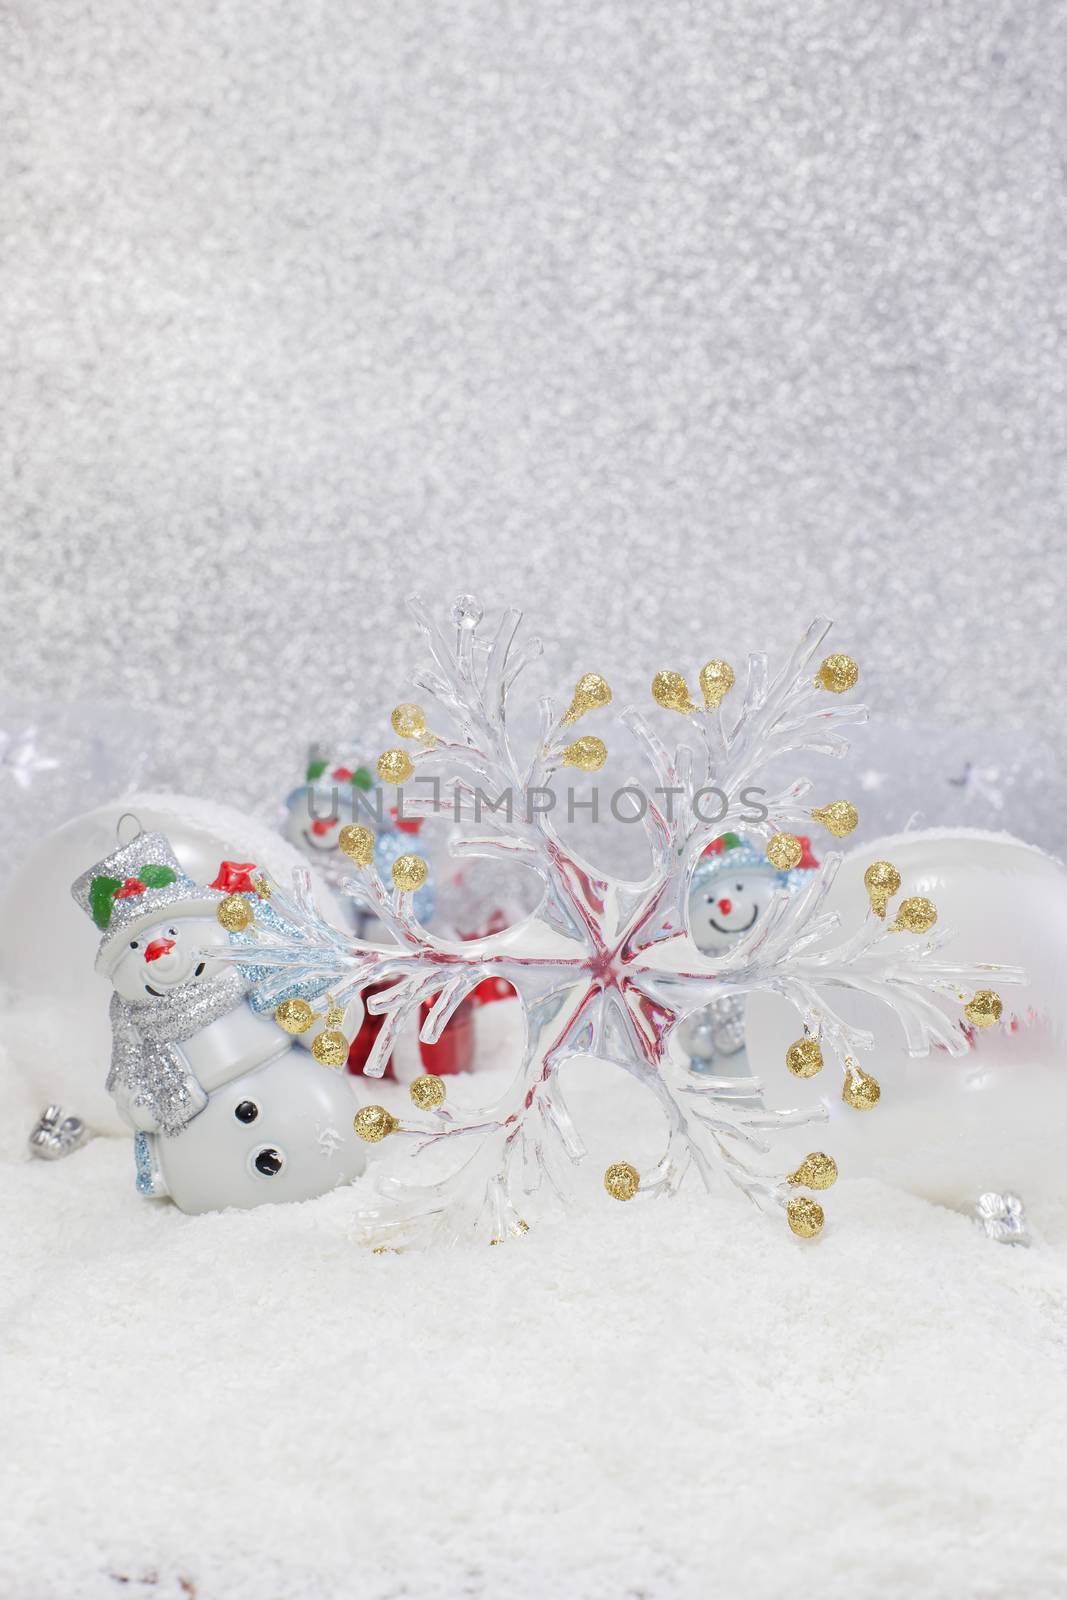 Cheerful snowman and Christmas tree decorations. Winter background. High key  with shallow depth of field